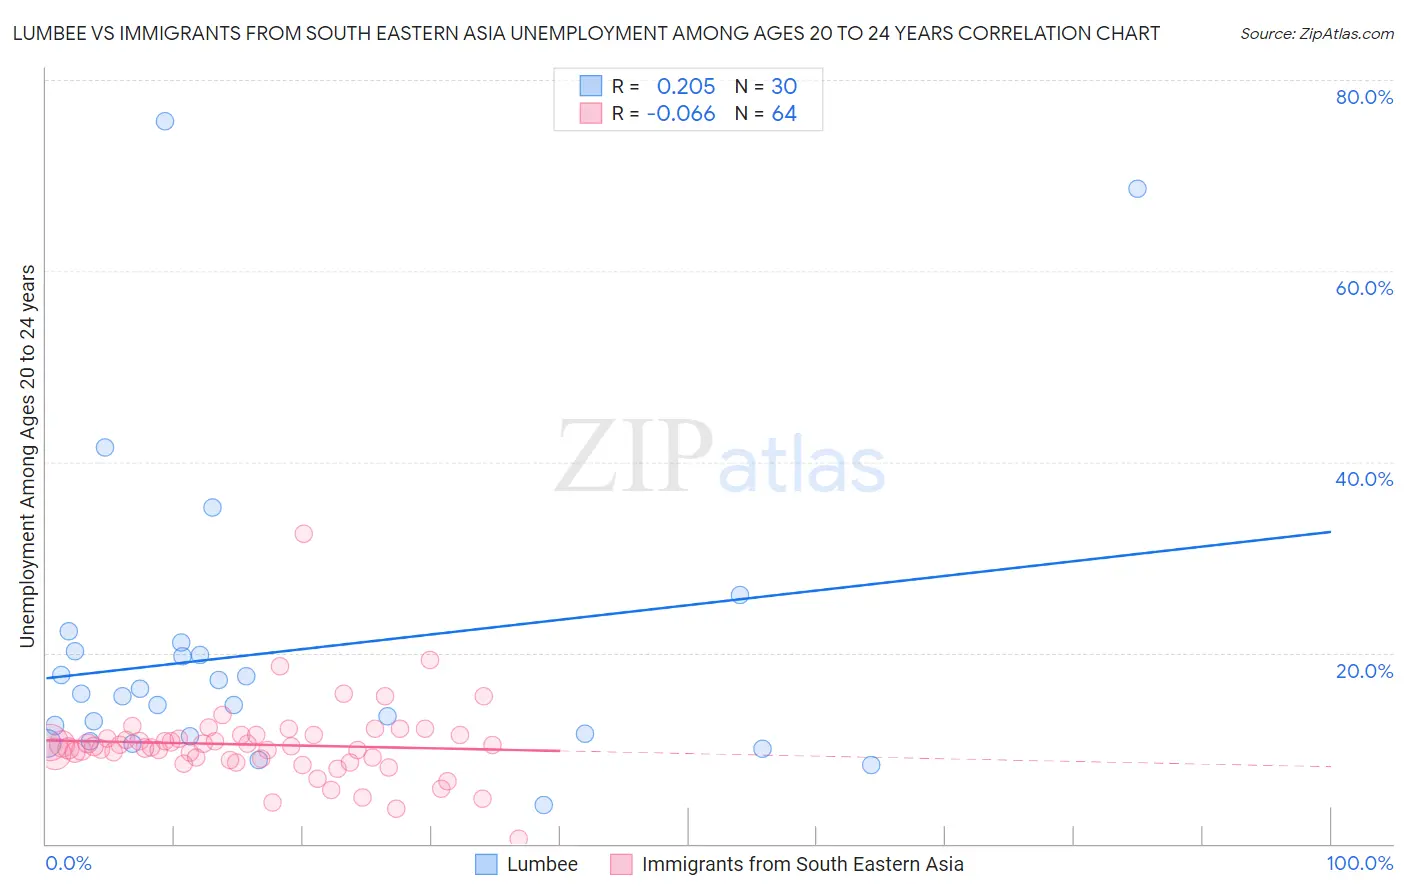 Lumbee vs Immigrants from South Eastern Asia Unemployment Among Ages 20 to 24 years